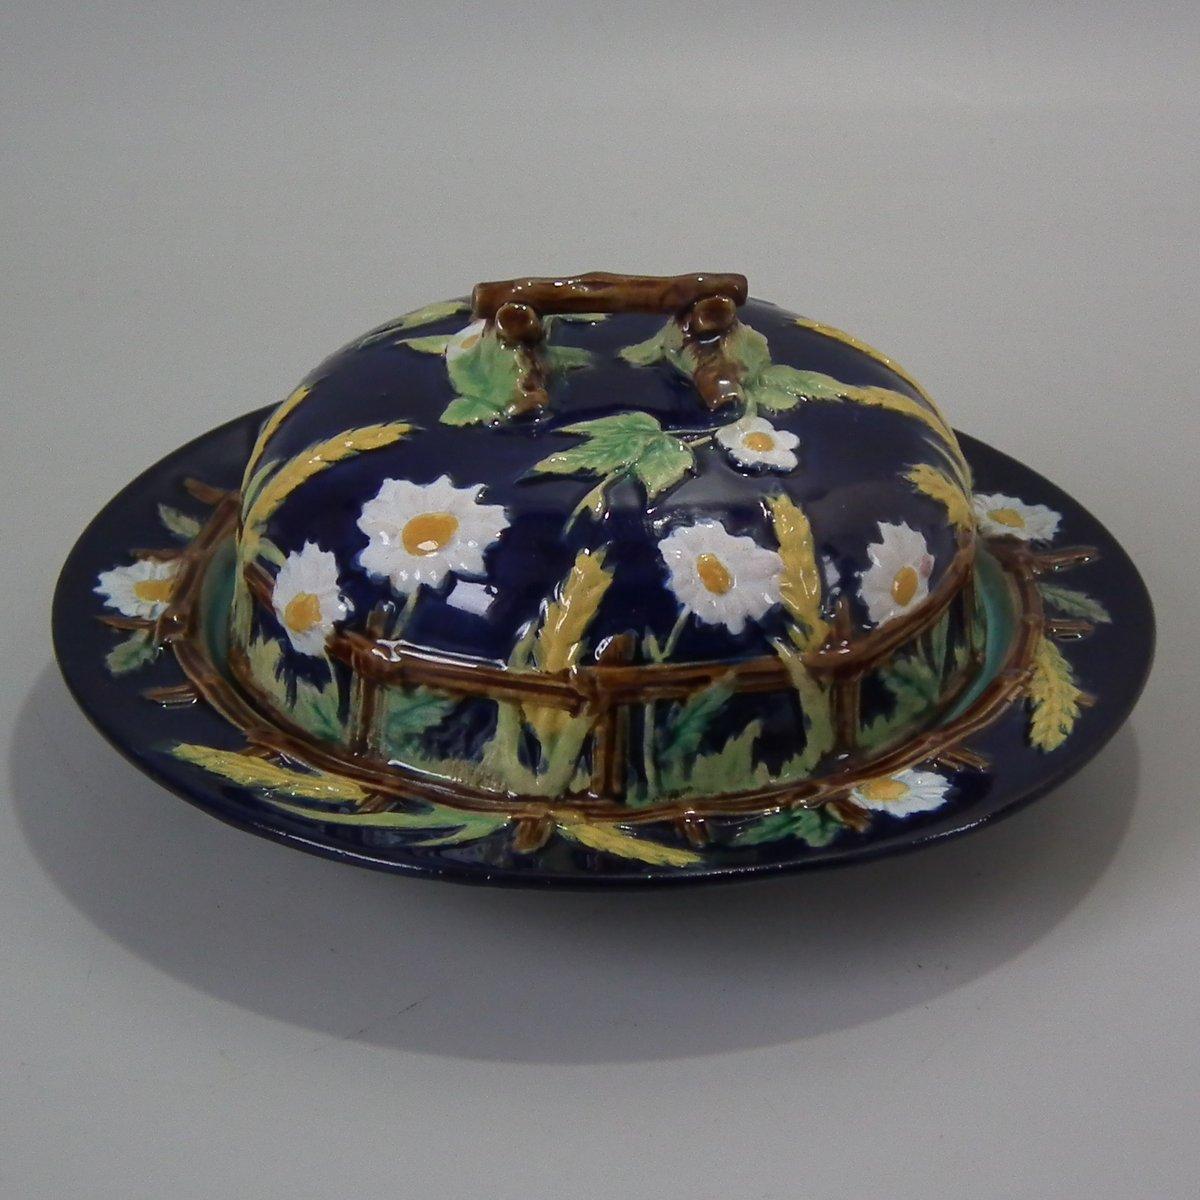 George Jones Majolica muffin dish with cover which features a picket fence, daisies, corn, brambles and a twig handle. Cobalt blue ground version. Coloration: white, ochre, green, are predominant. Impressed and painted marks to the reverse.